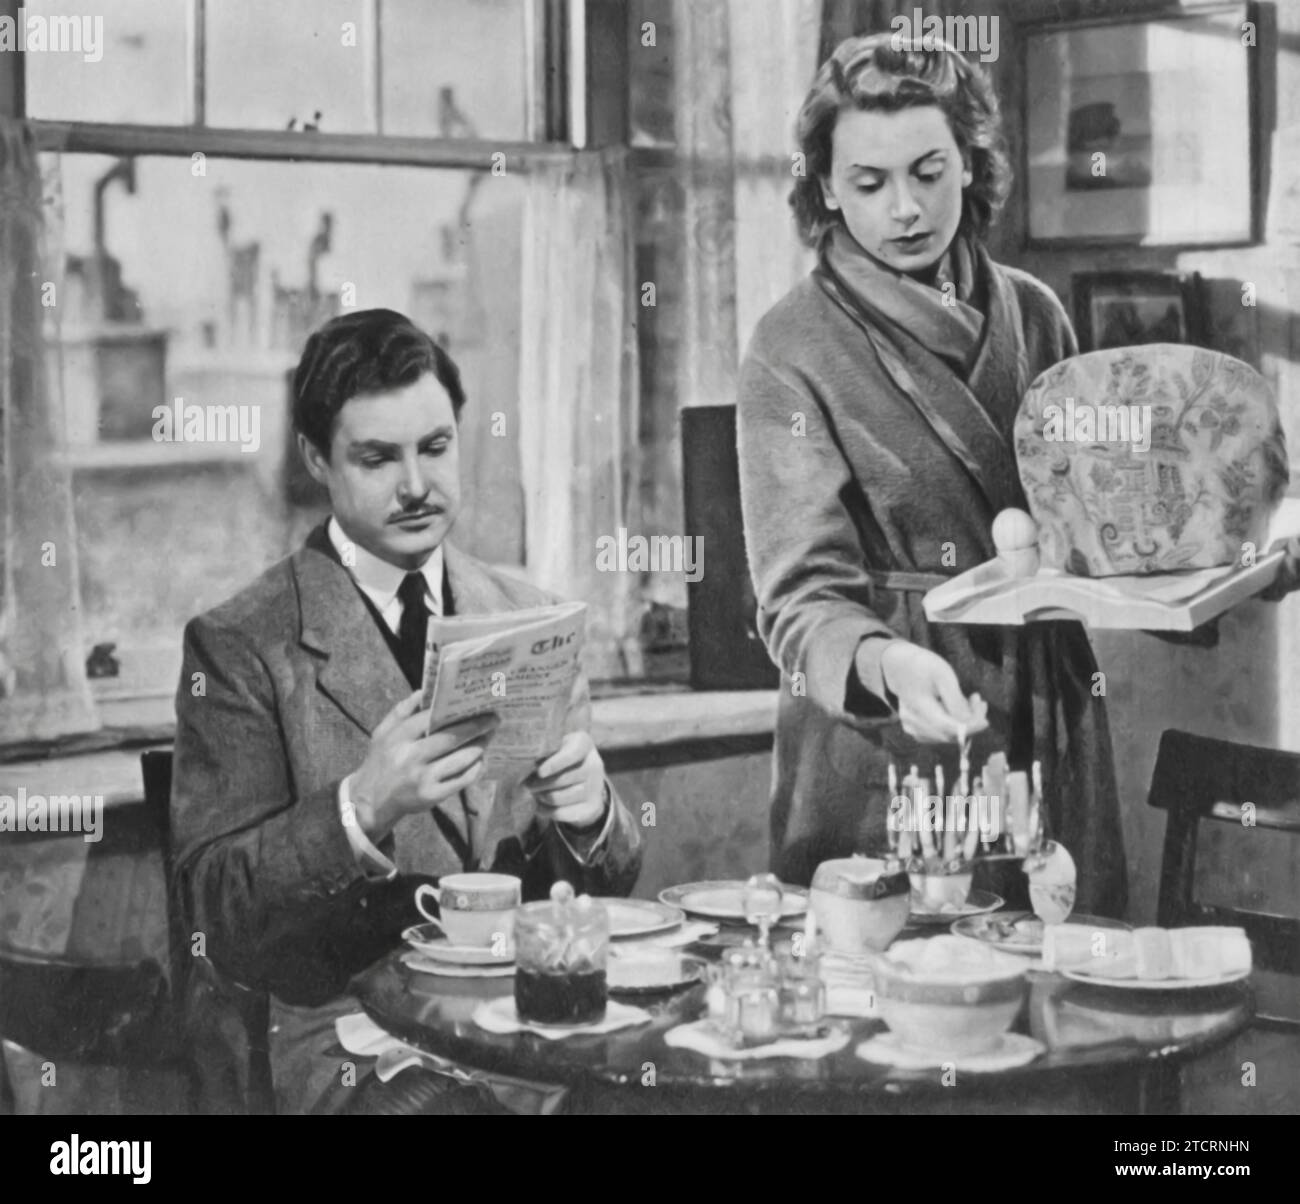 Robert Donat and Deborah Kerr star in 'Perfect Strangers' (1945). The film delves into the lives of a married couple who, after being separated during World War II, meet again and struggle with the changes each has undergone, re-evaluating their relationship in the process. Stock Photo